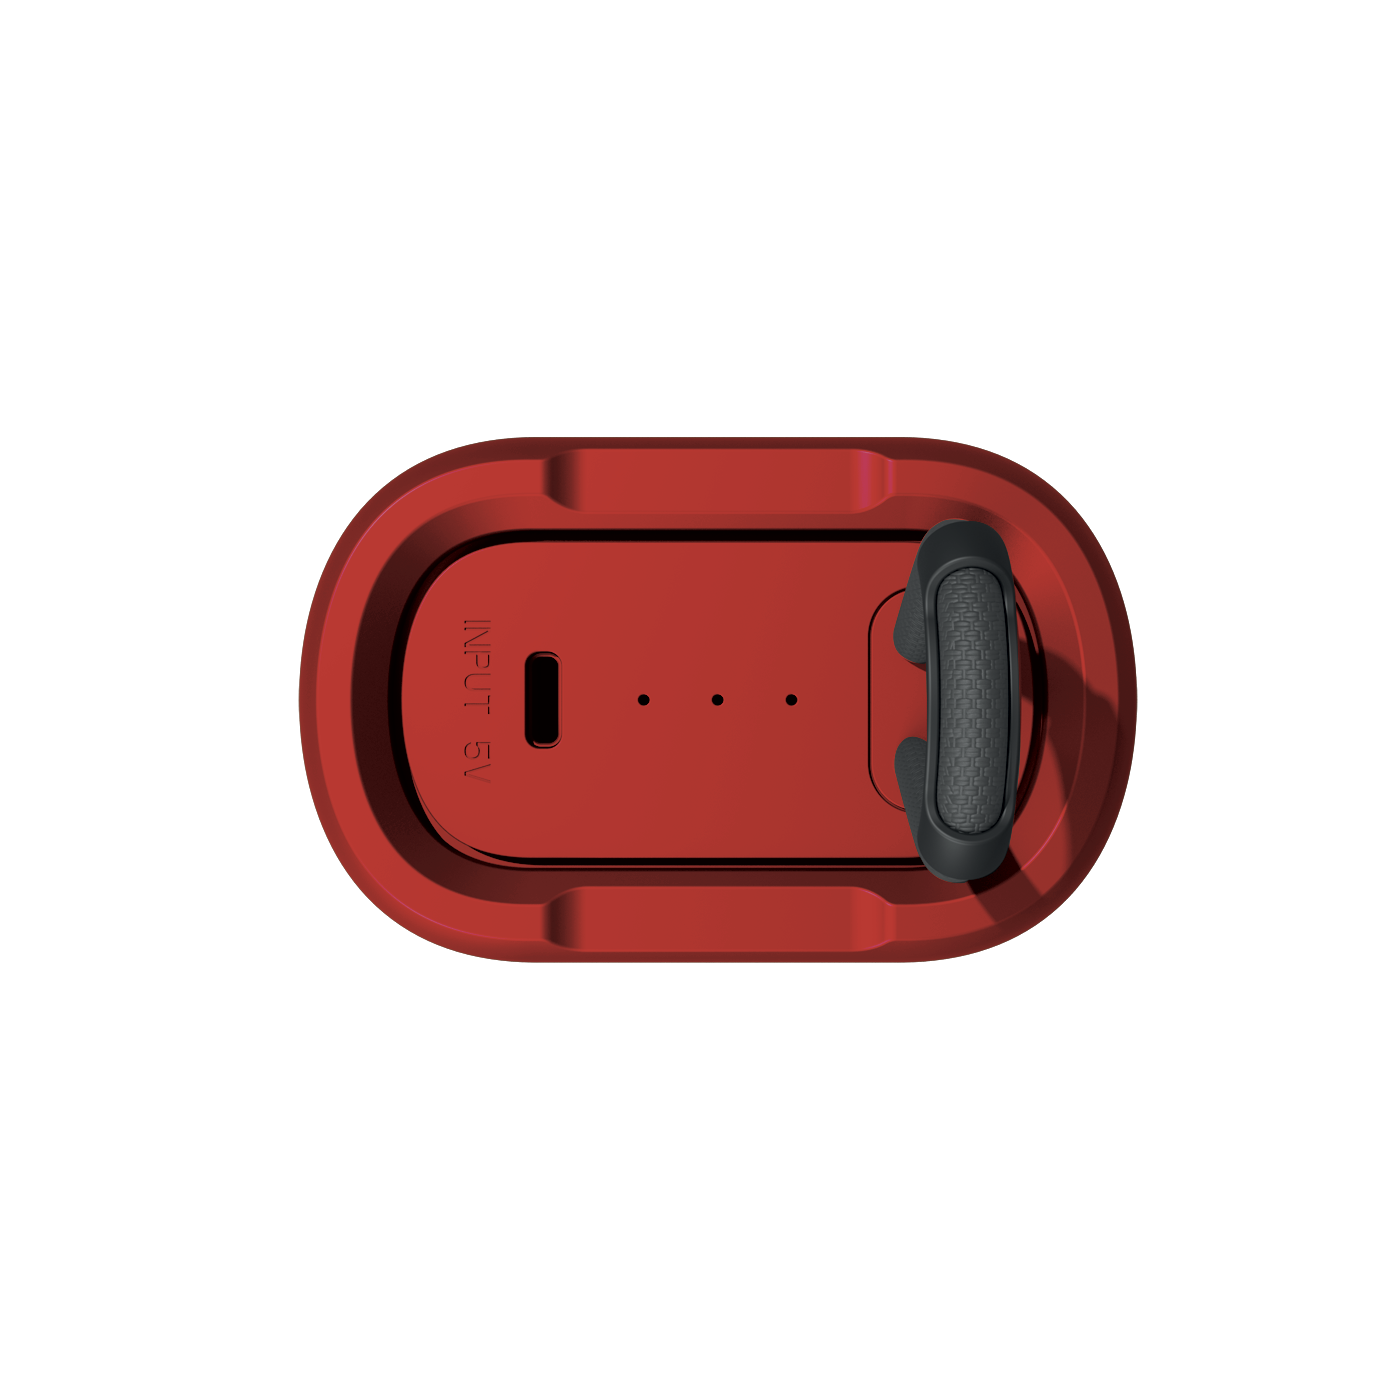 Techmade speaker bluetooth compact red TM-M350-RED